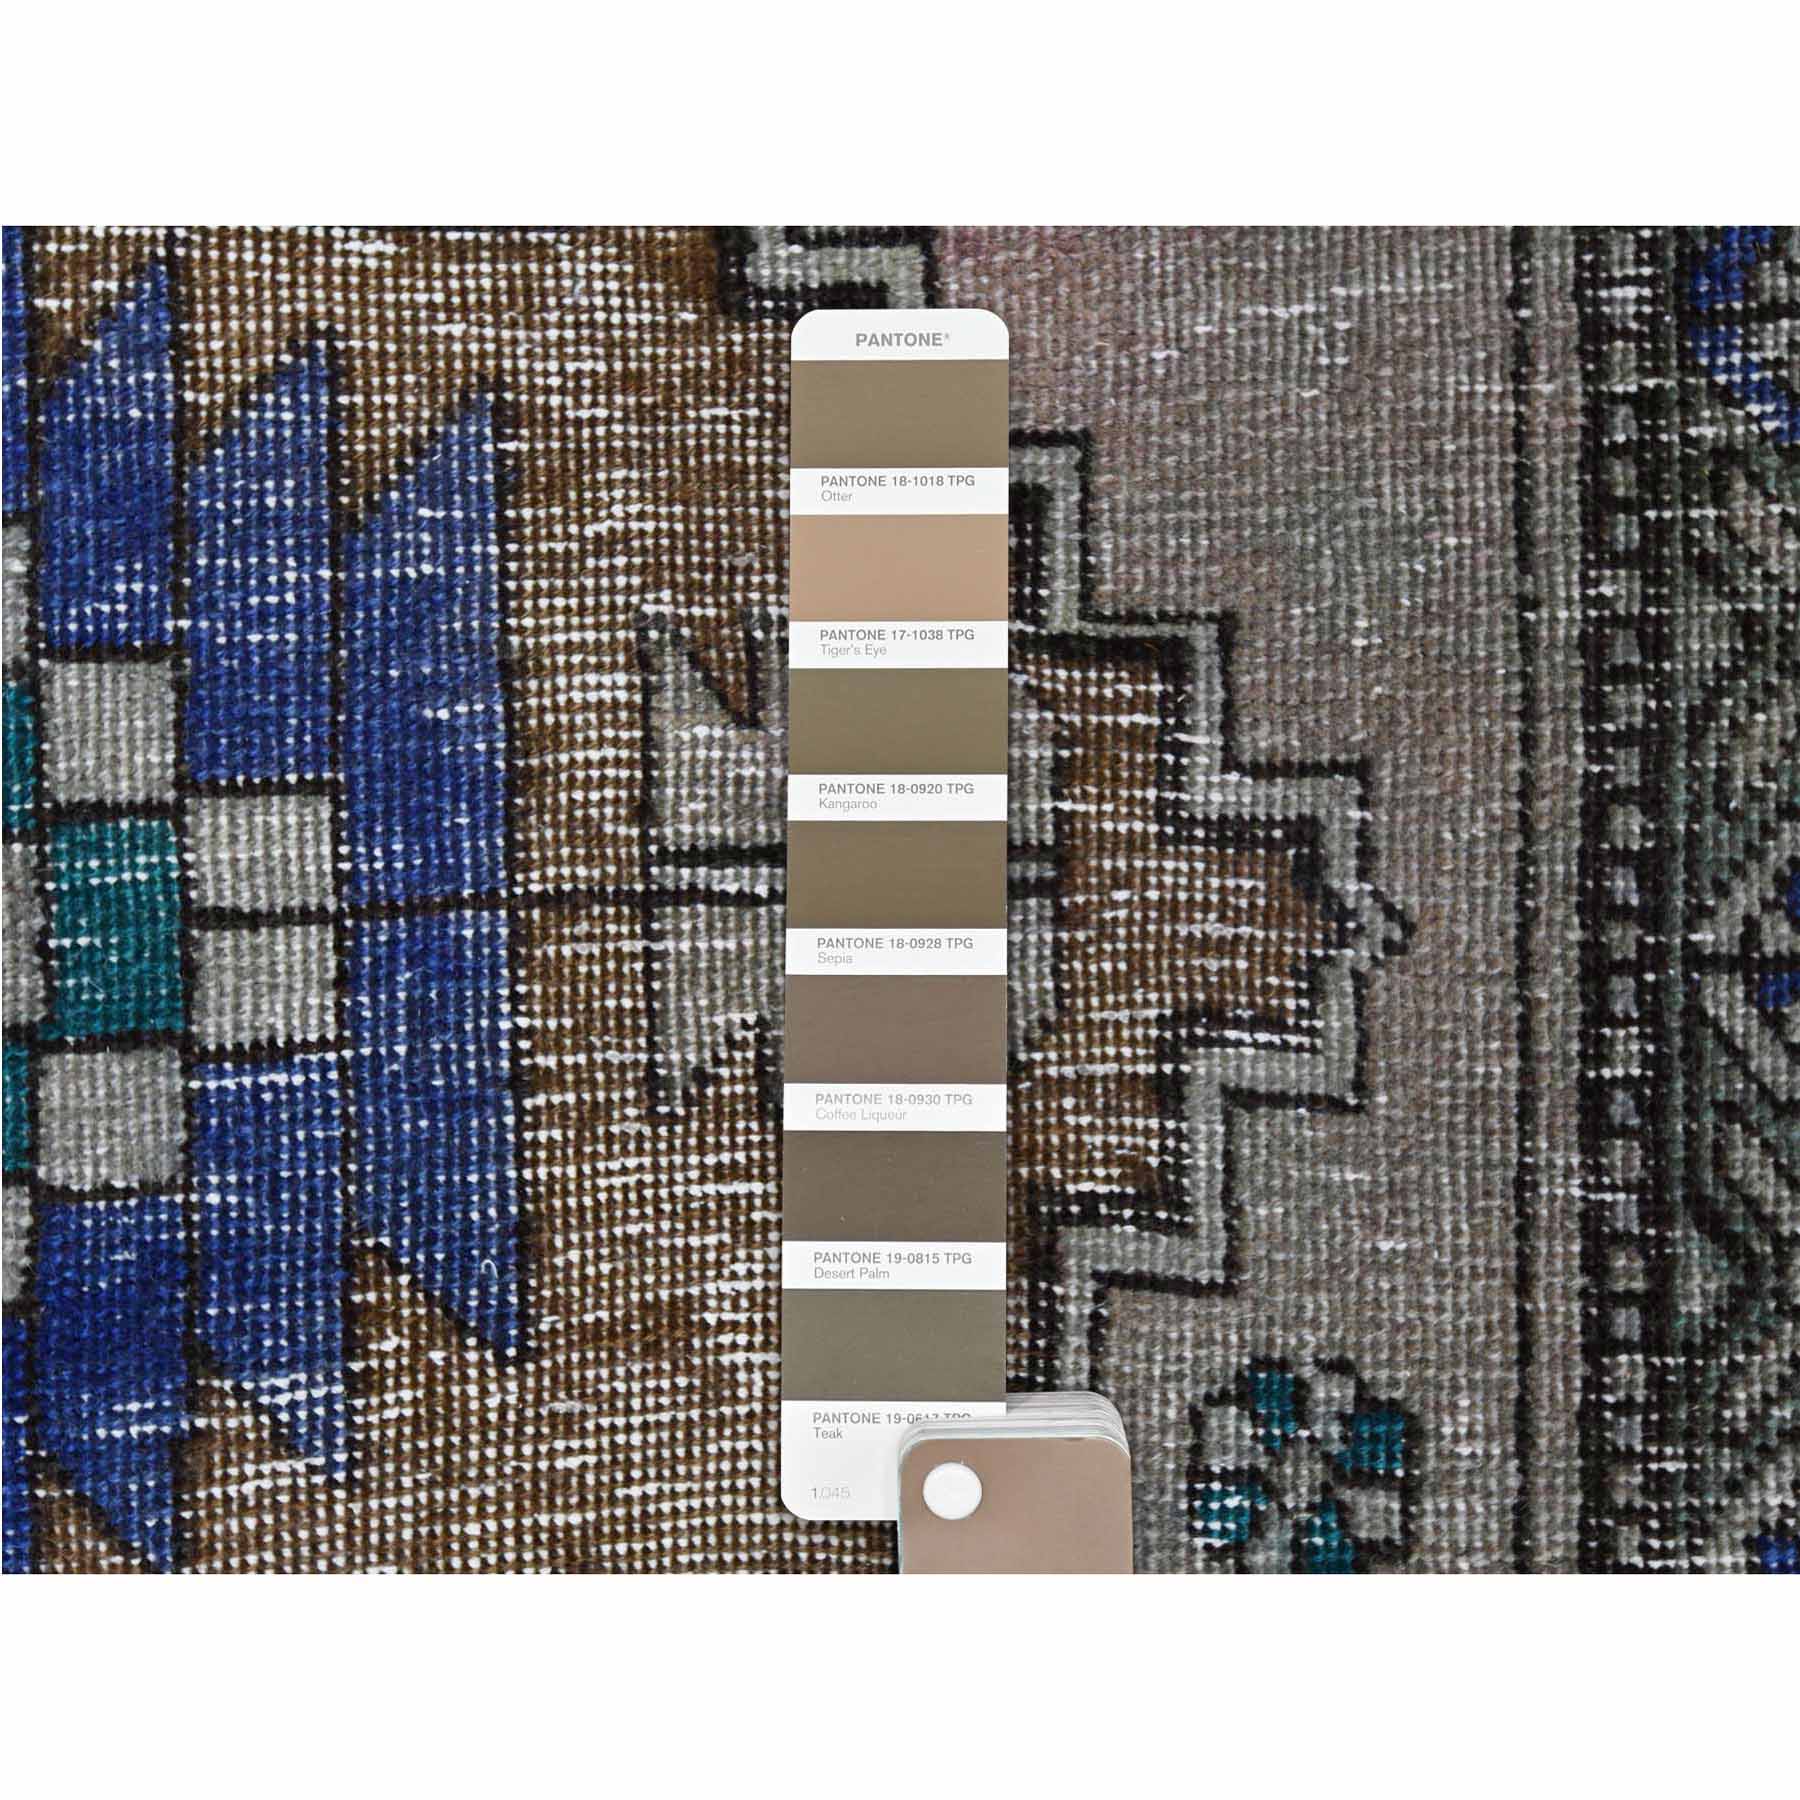 Overdyed-Vintage-Hand-Knotted-Rug-305060